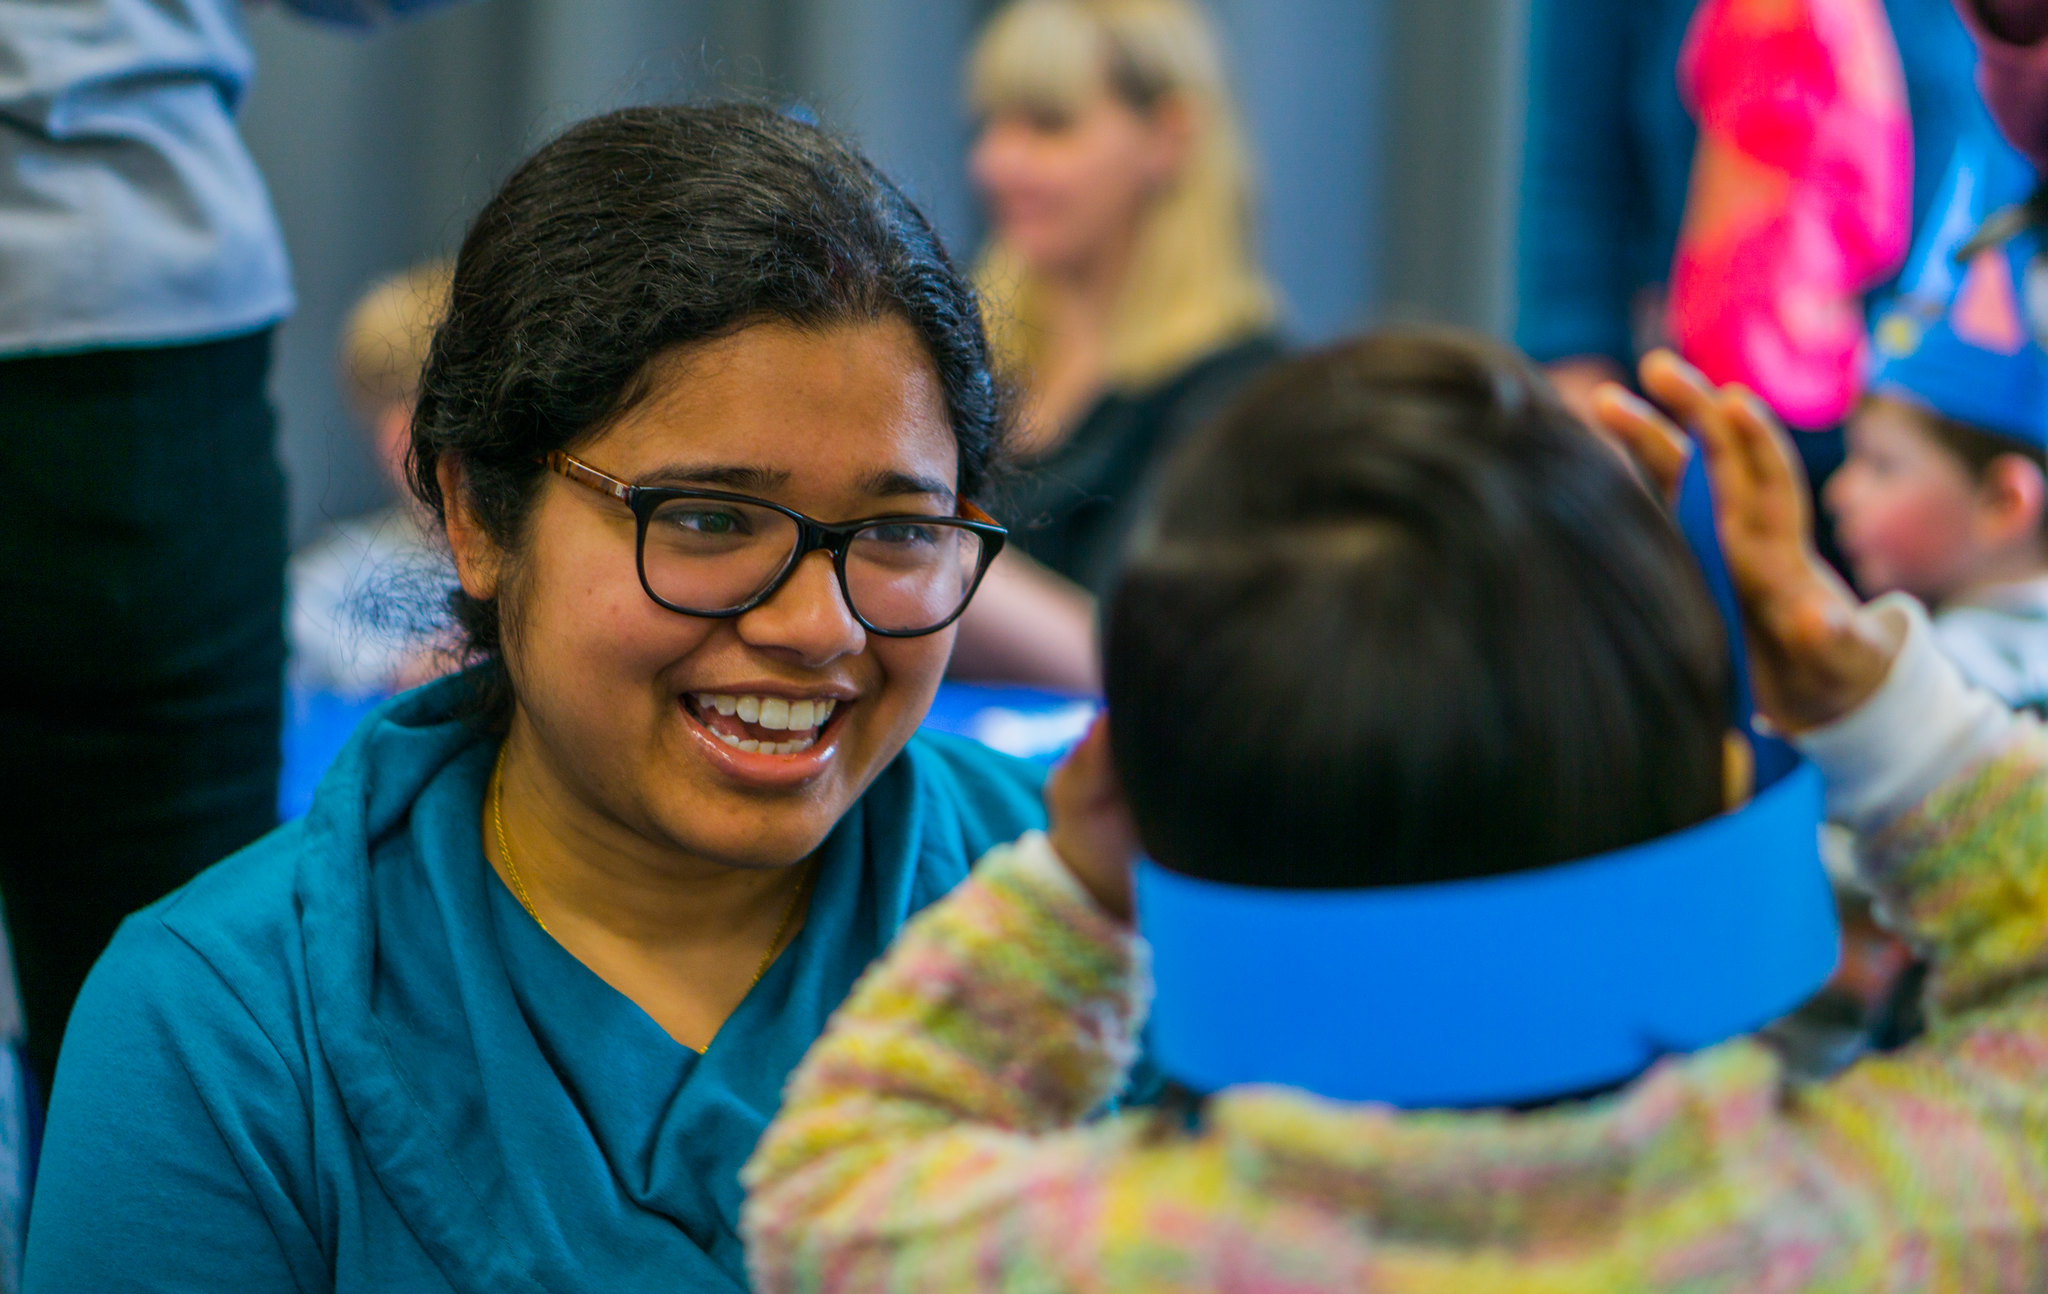 Woman smiling at a child at family library event